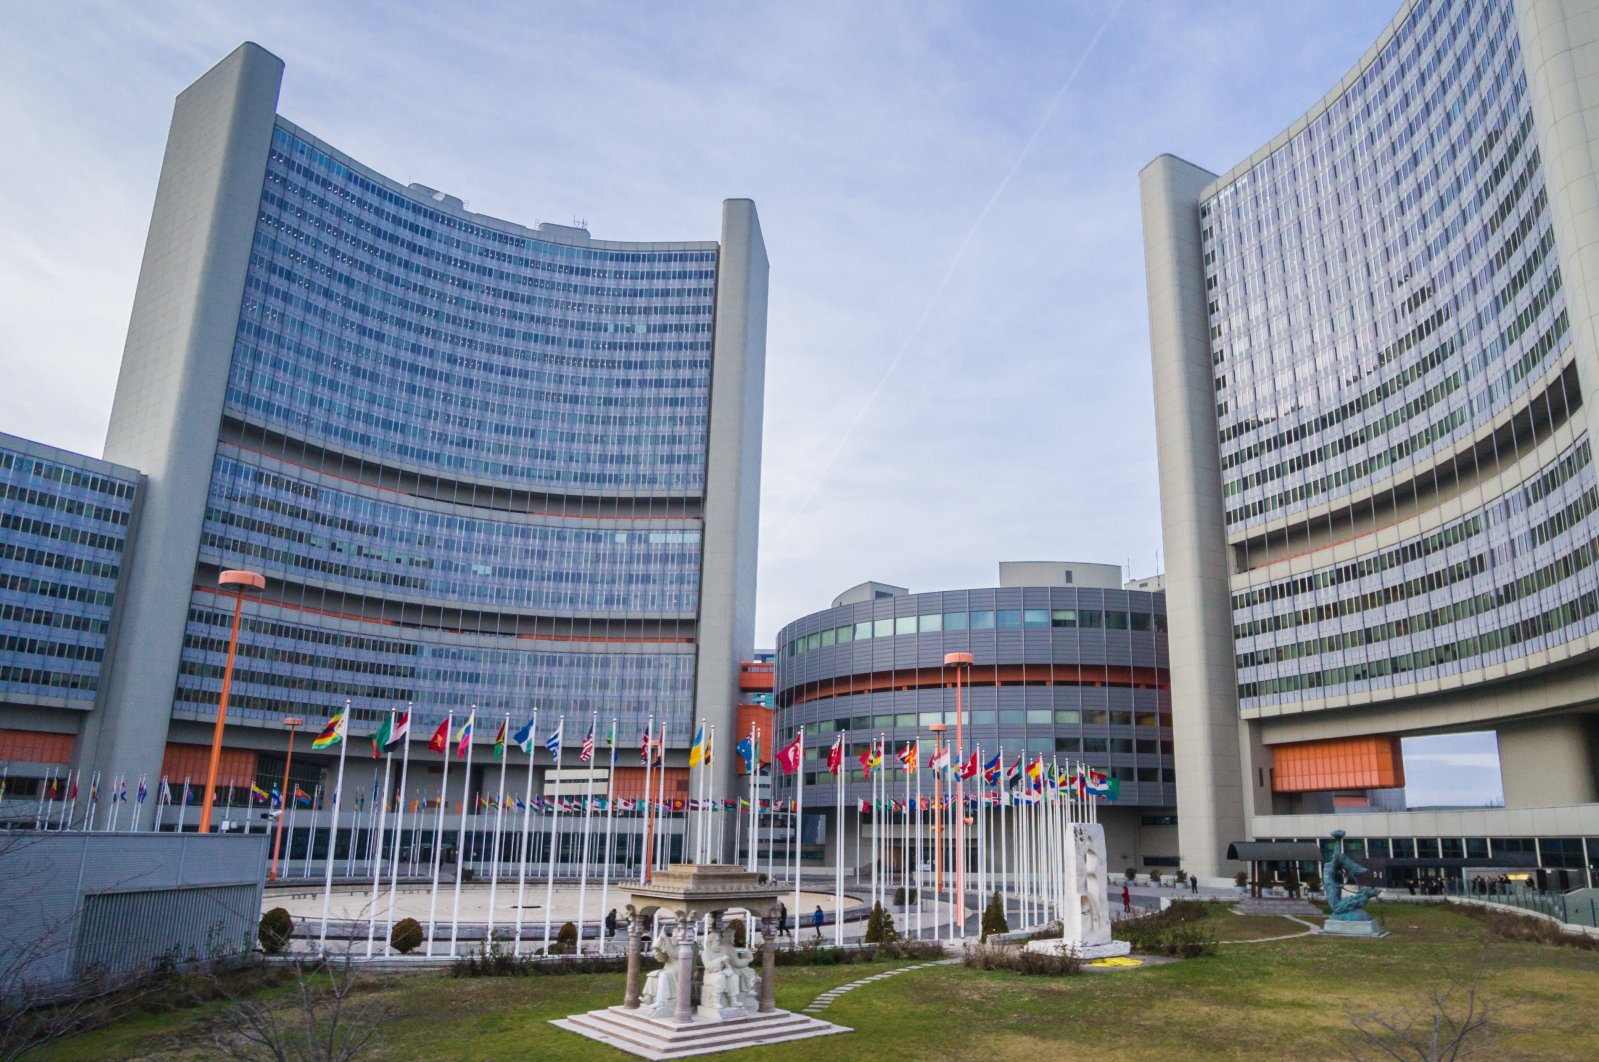  The Vienna International Centre, where offices of The United Nations International Atomic Energy Agency IAEA are located,  Jan. 16, 2014. (Shutterstock File Photo)